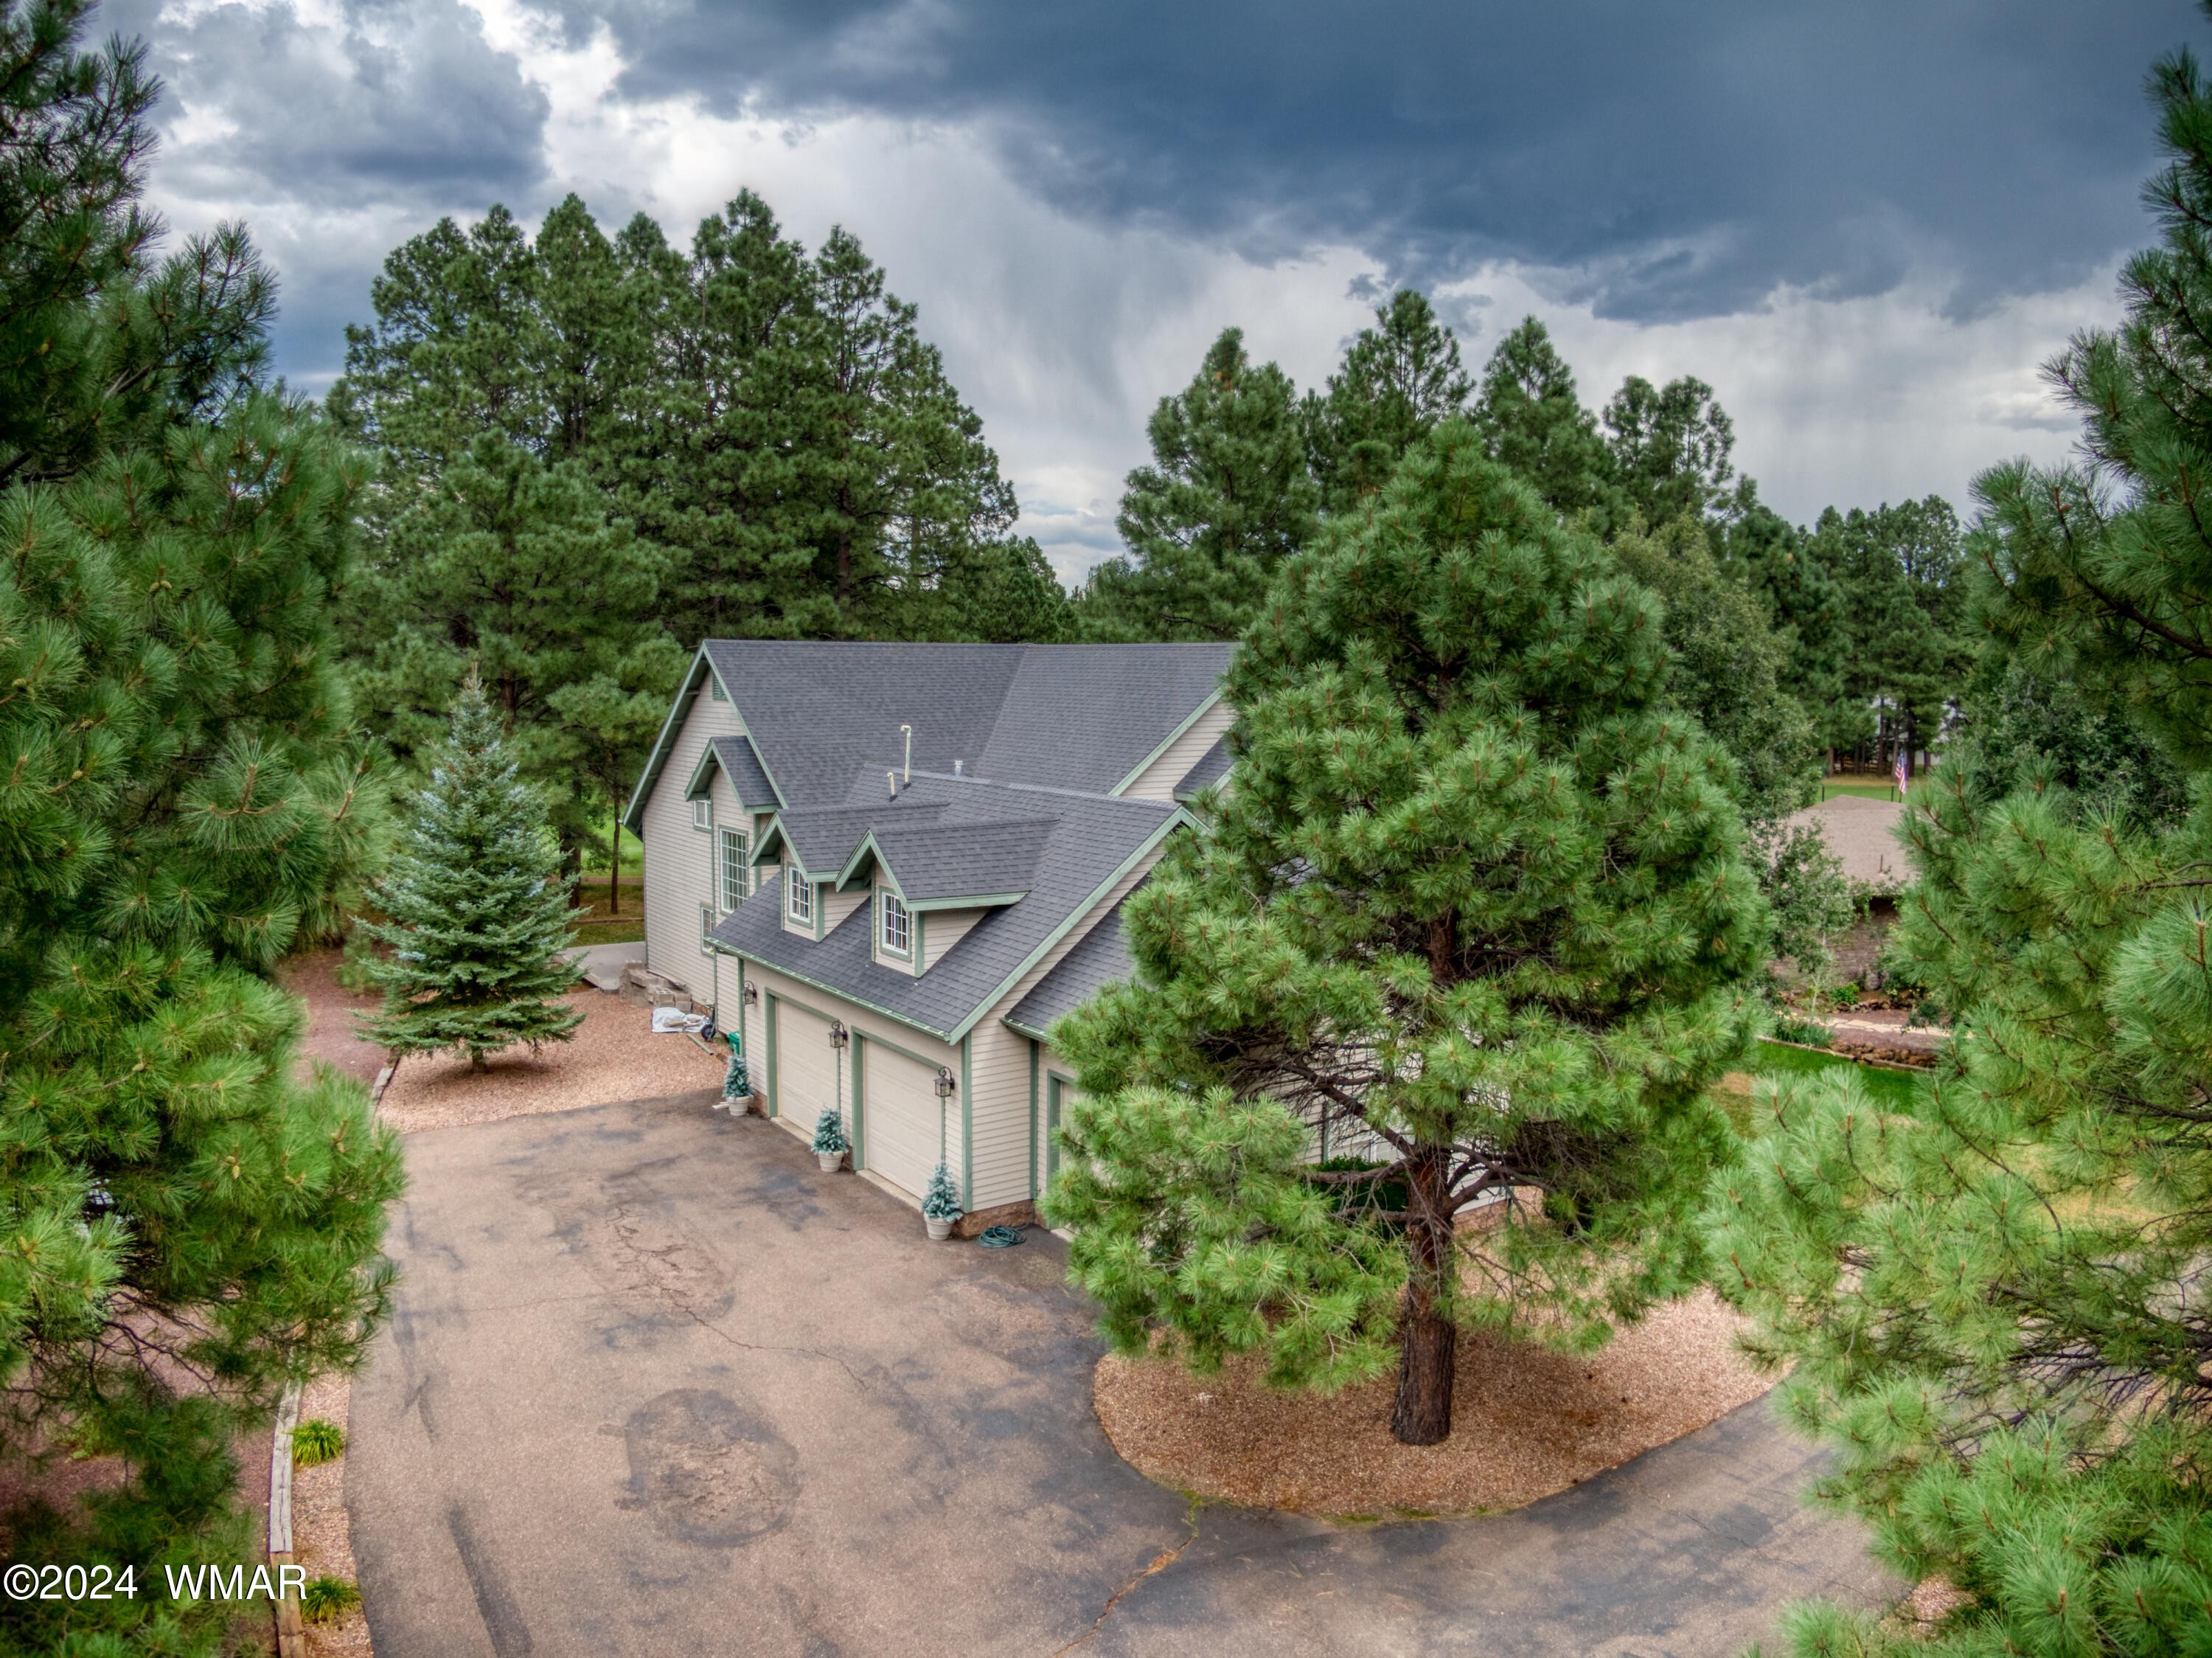 Pinetop, Arizona, 85935, United States, 4 Bedrooms Bedrooms, ,3.5 BathroomsBathrooms,Residential,For Sale,1470758